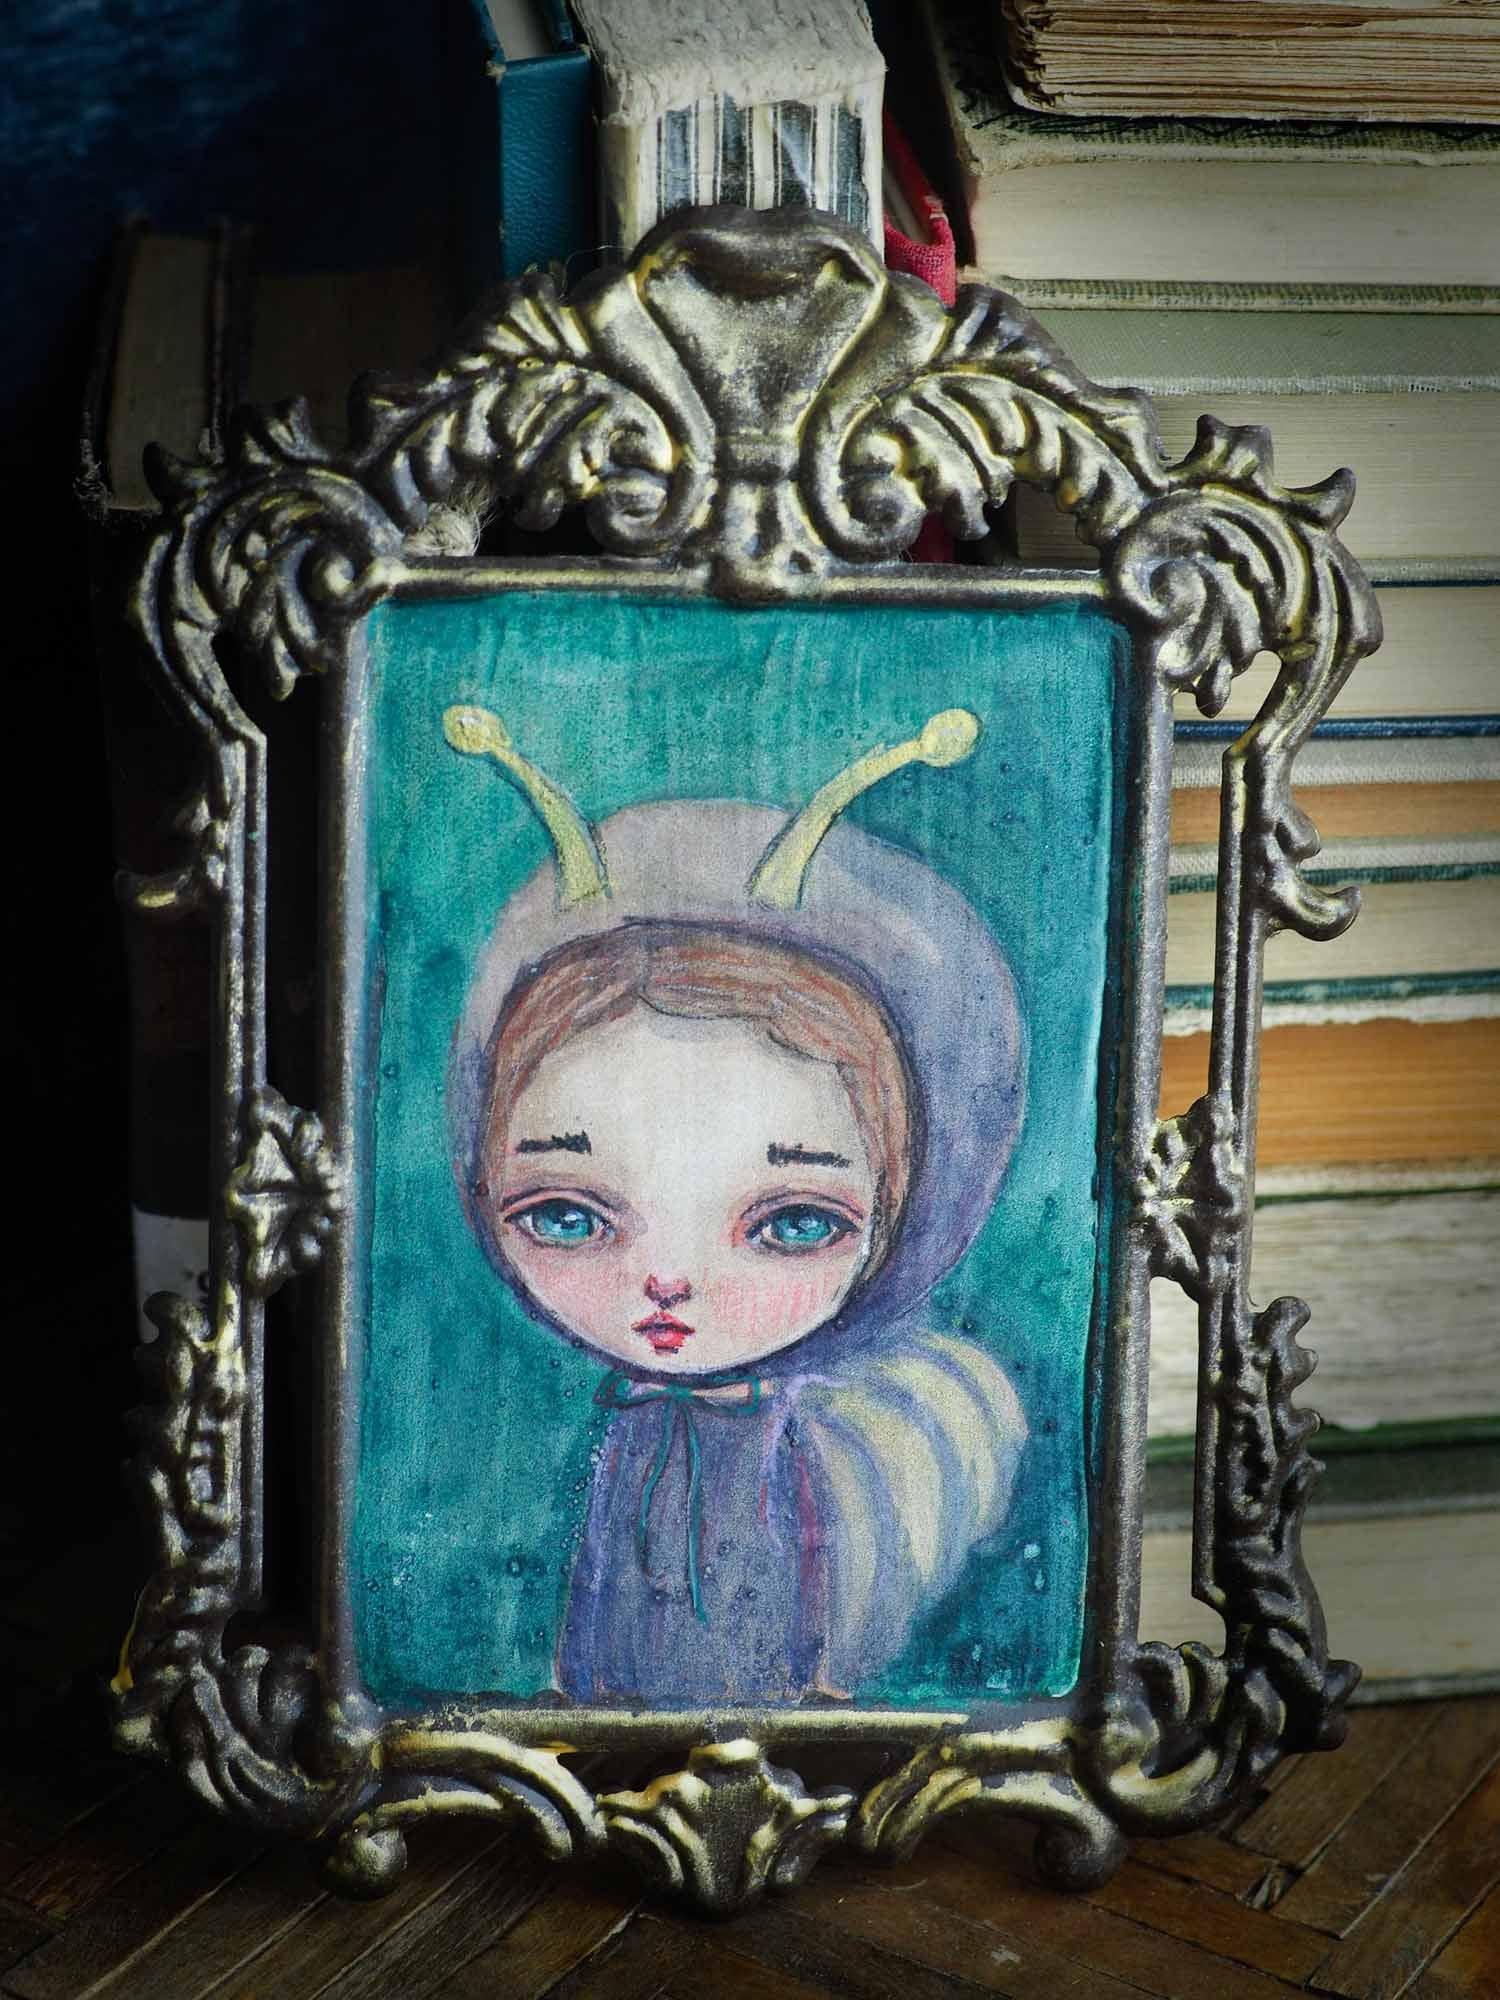 Danita painted a watercolor painting original with a butterfly girl over a metal frame.